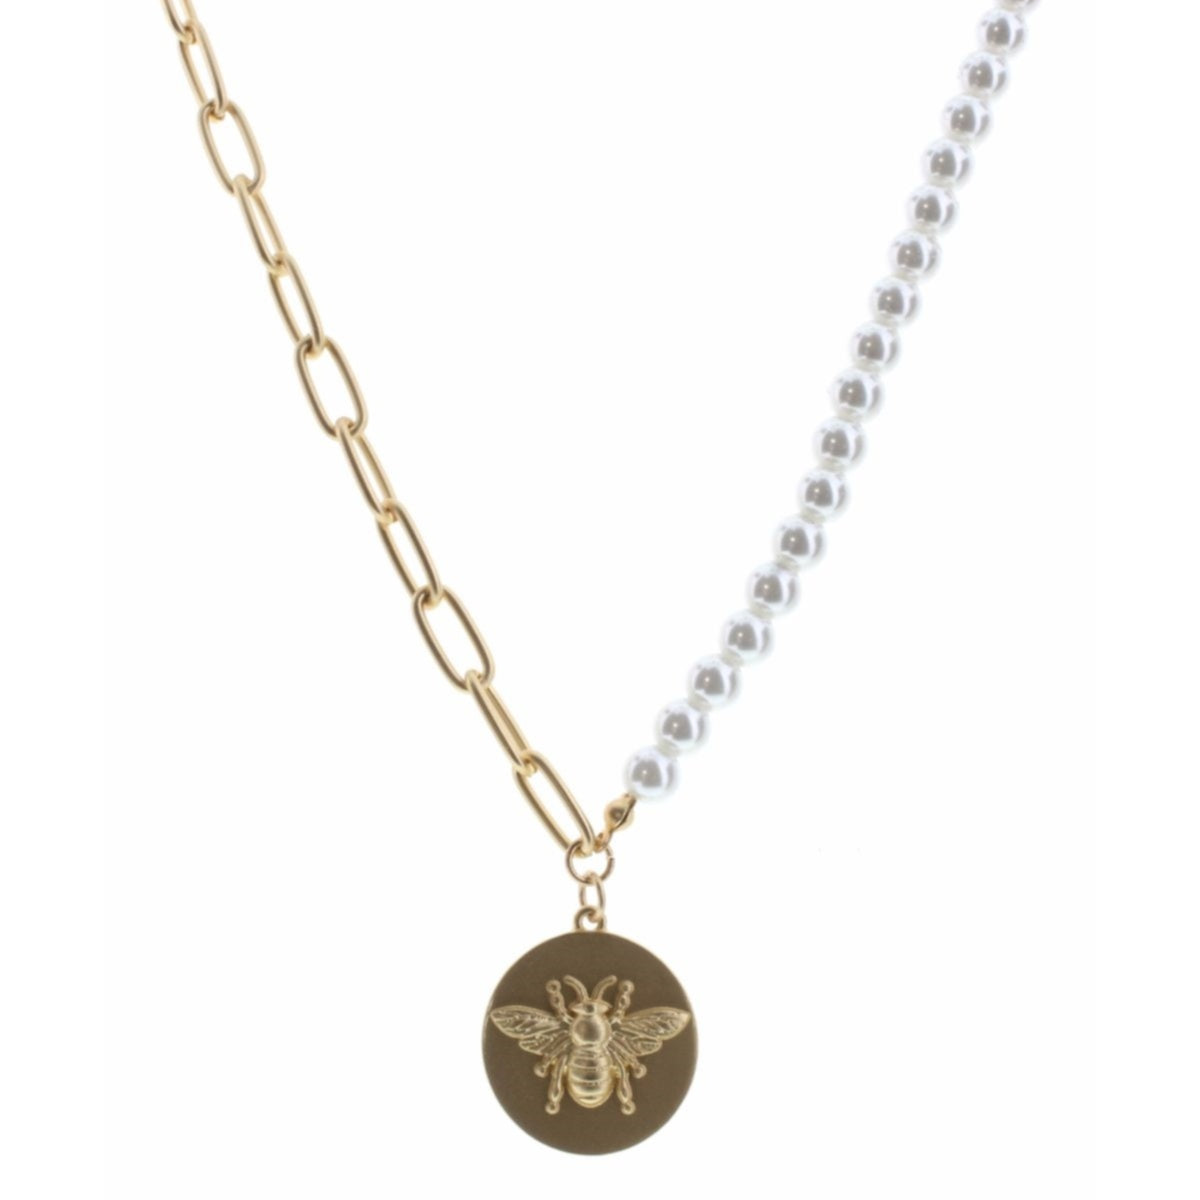 16" Pearl & Gold Chain with Raised Bee Charm Necklace